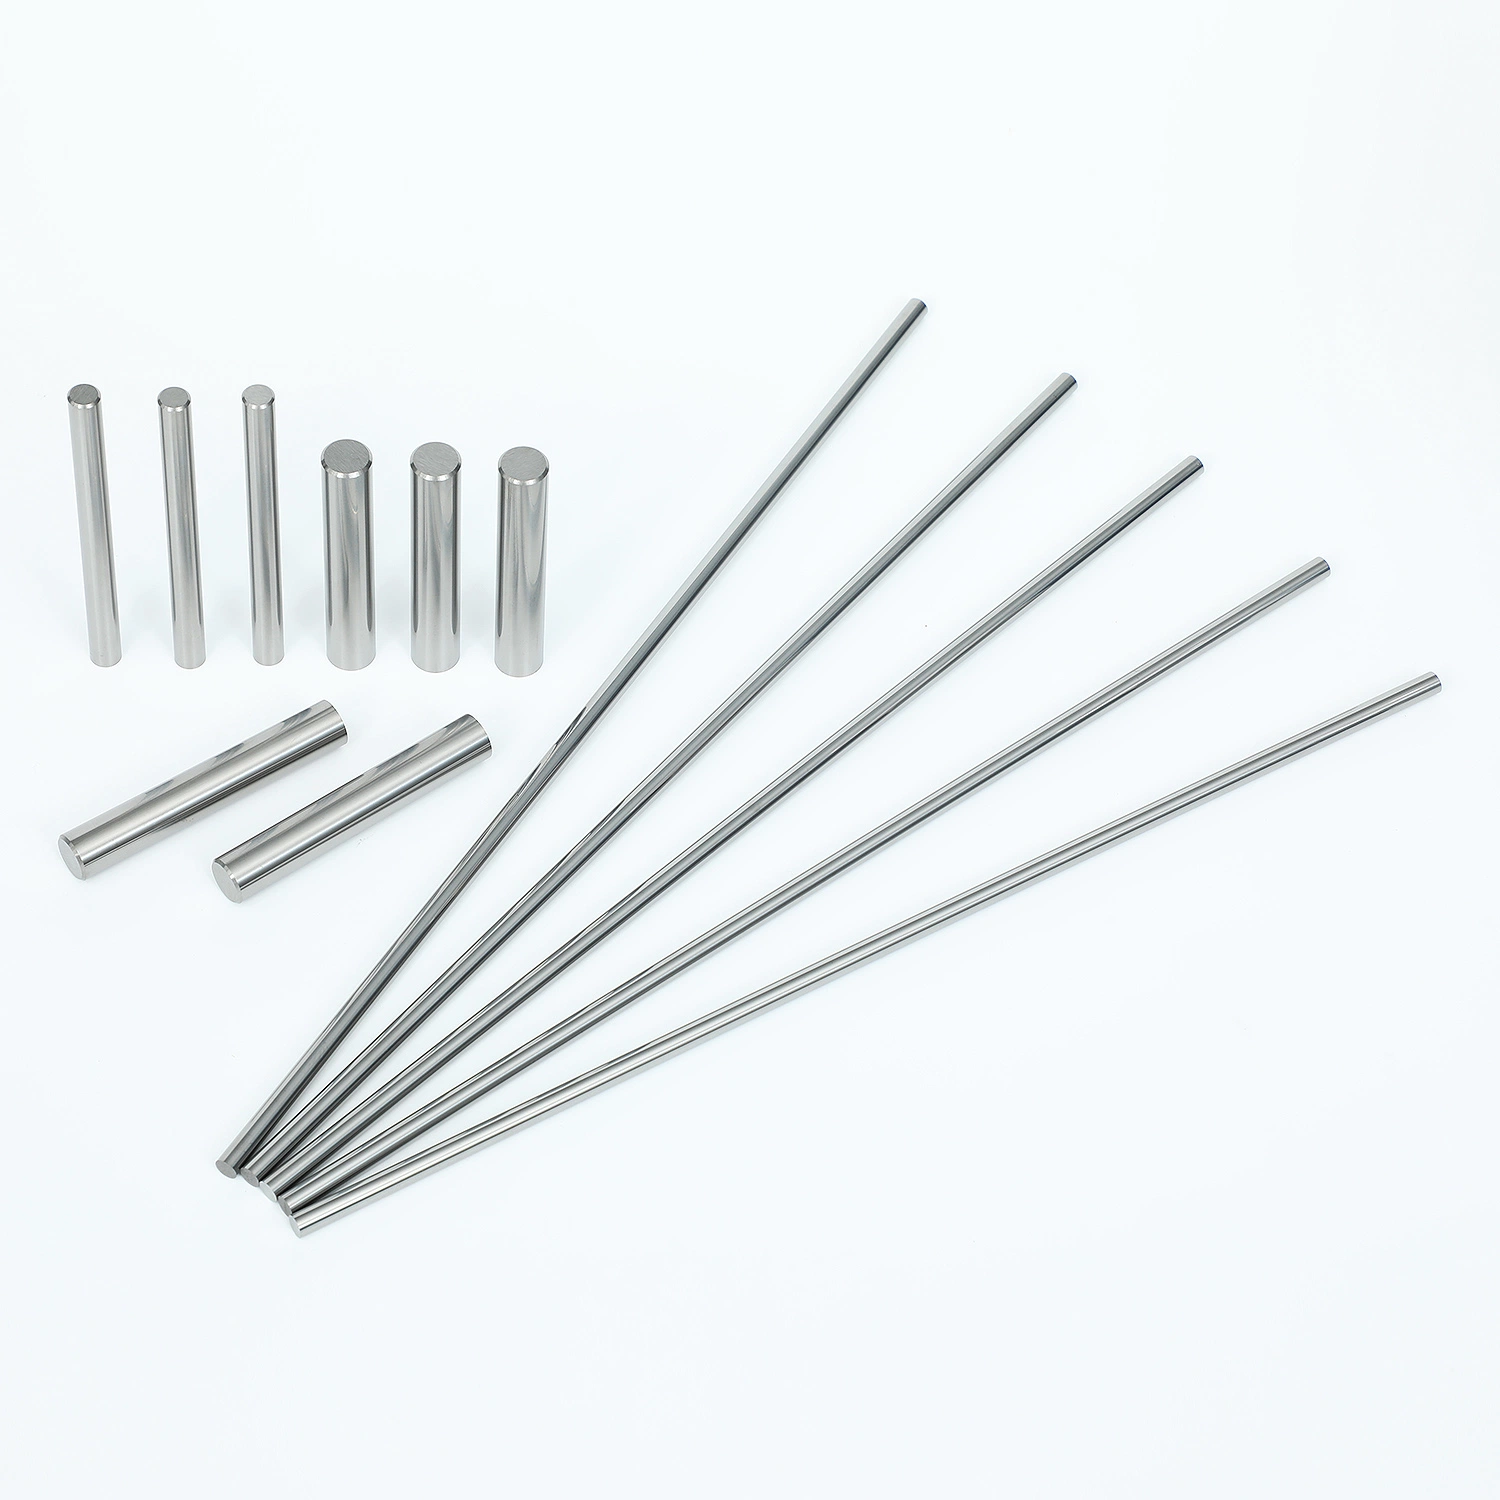 Solid Tungsten Carbide and Cermet Rods Blanks, Cemented Tungsten Carbide Rod